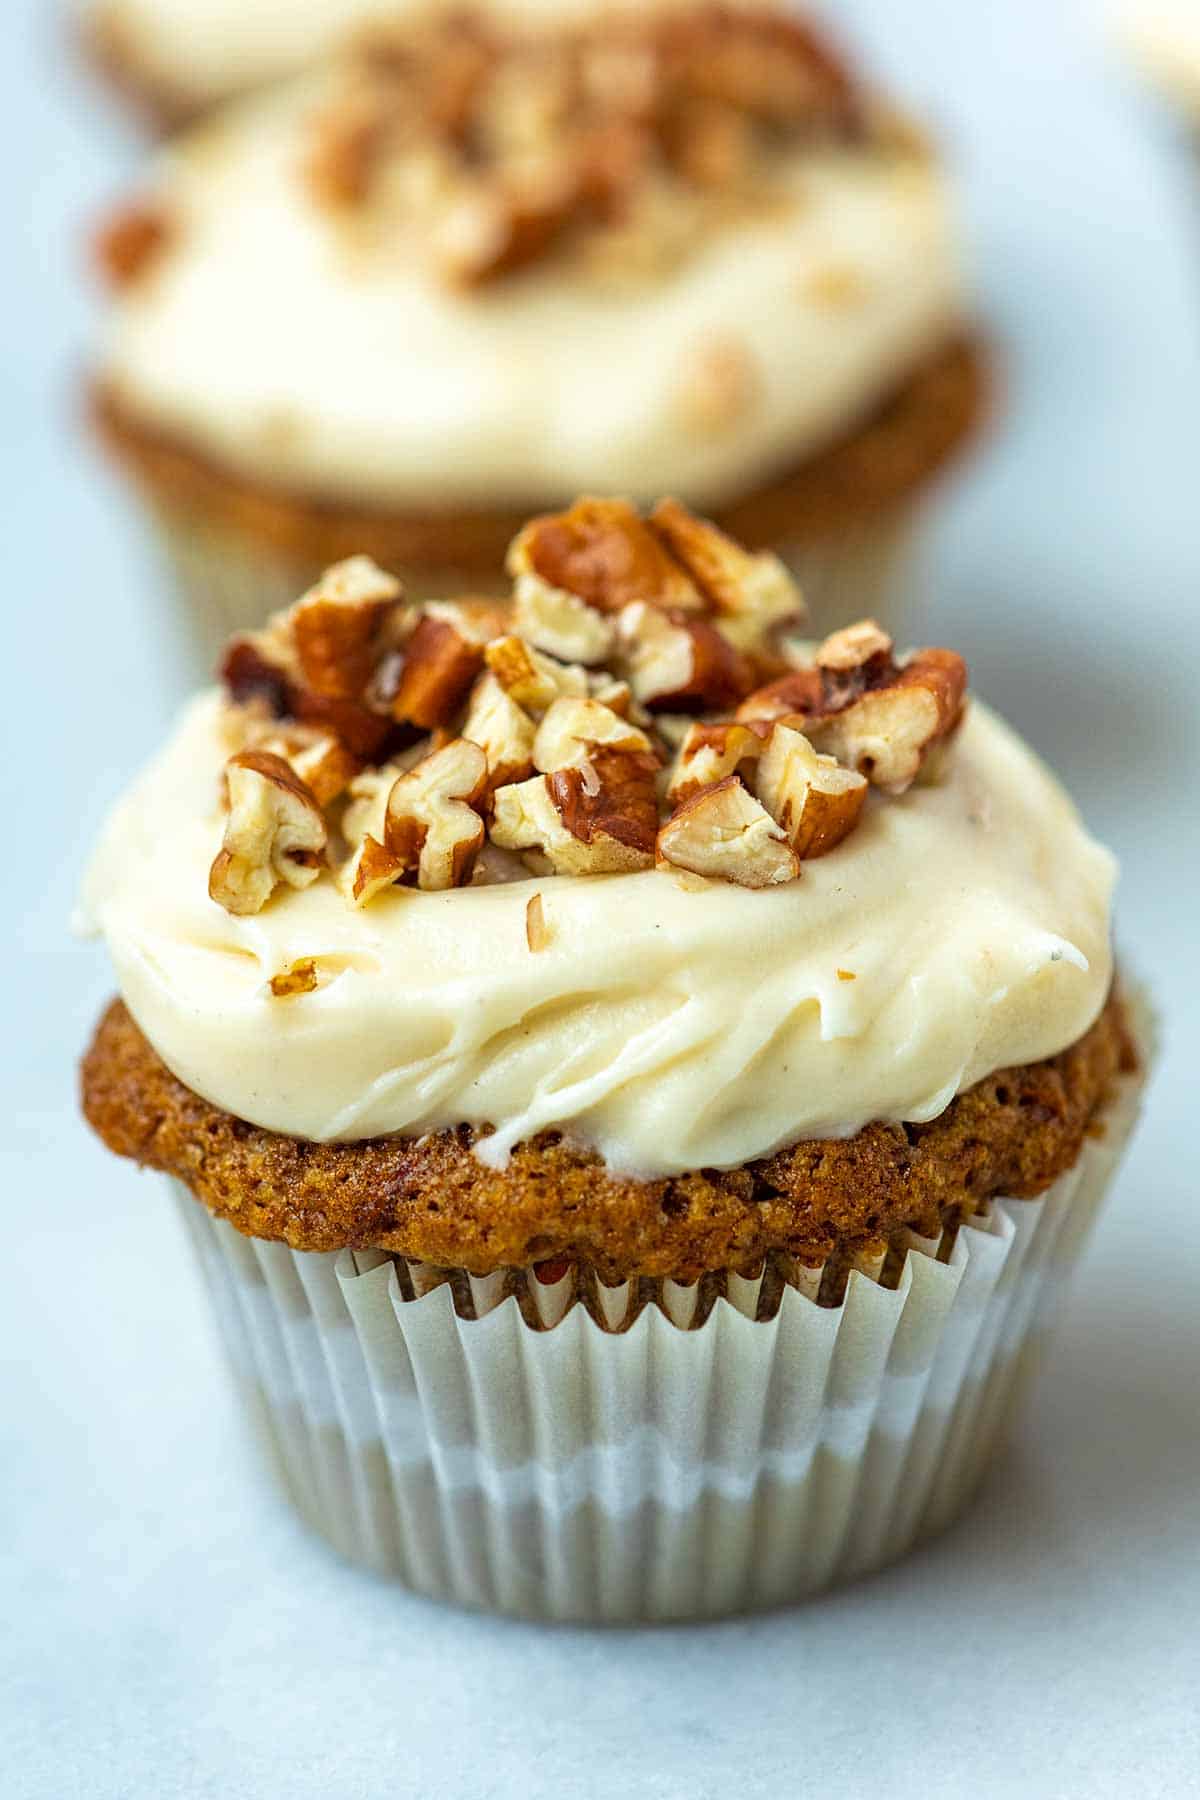 15 easy desserts: Easy Carrot Cake Cupcakes